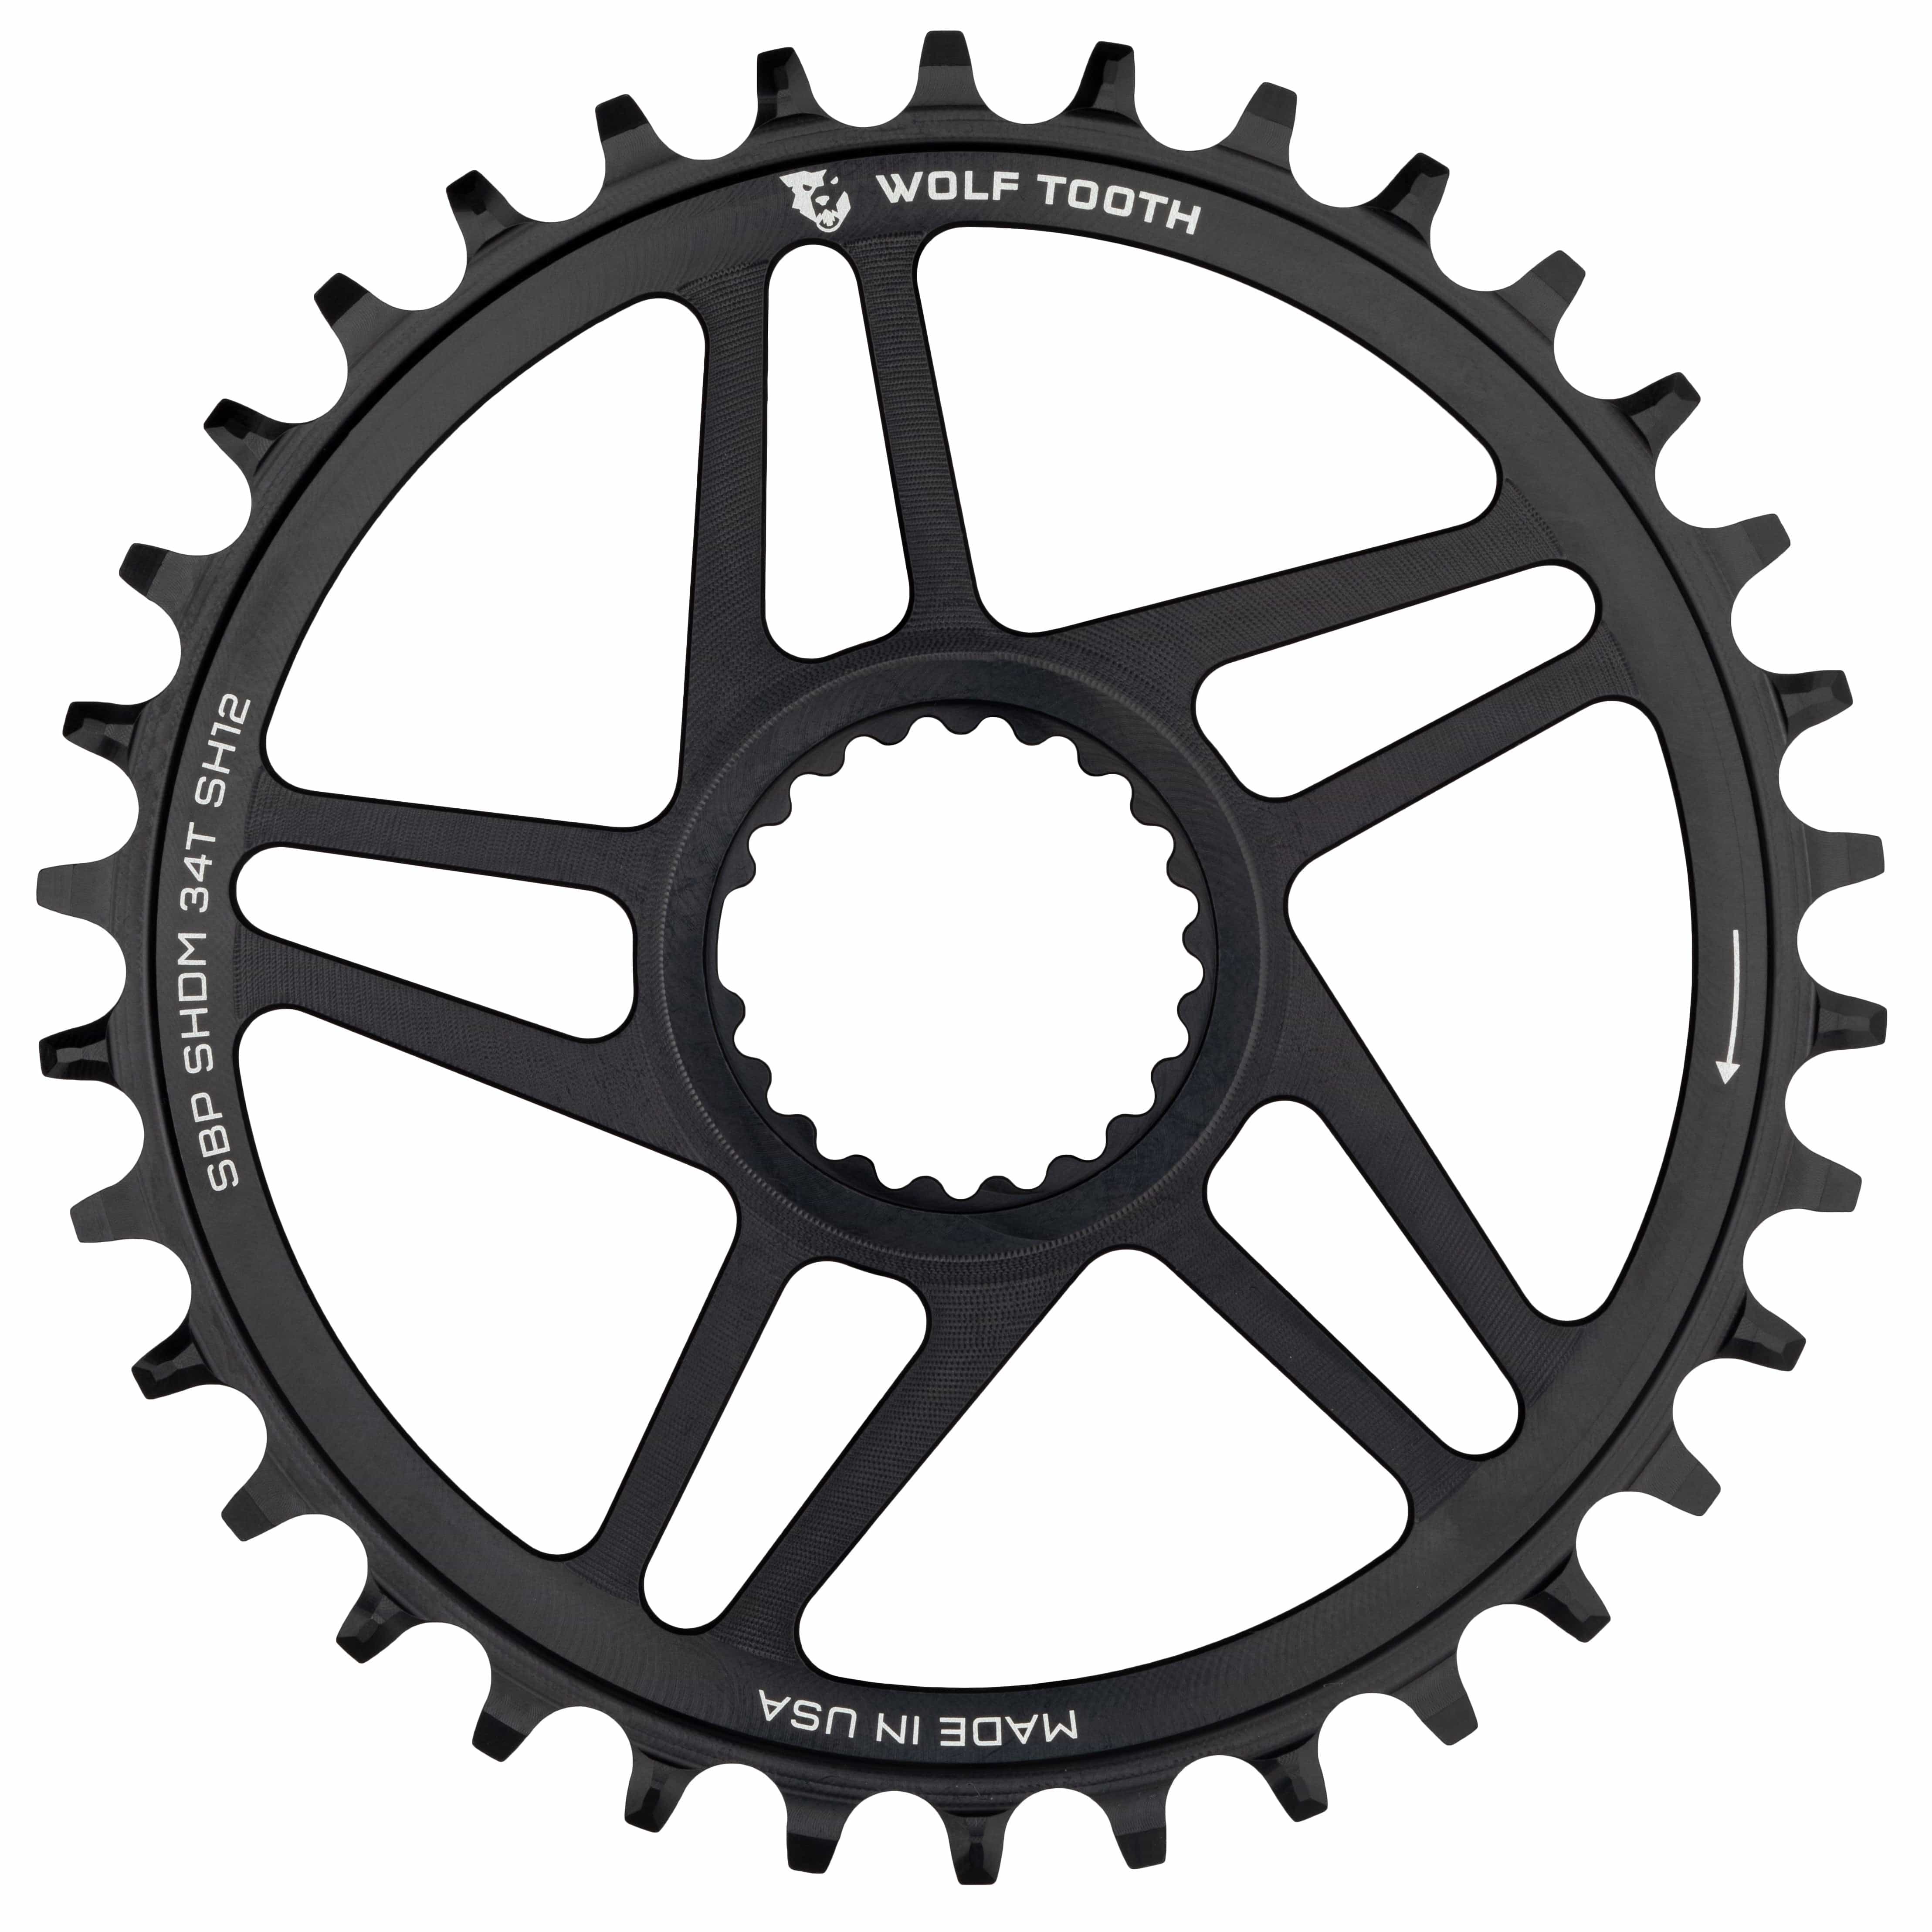 Wolf Tooth Components Boost Direct Mount Chainring Shimano 34T